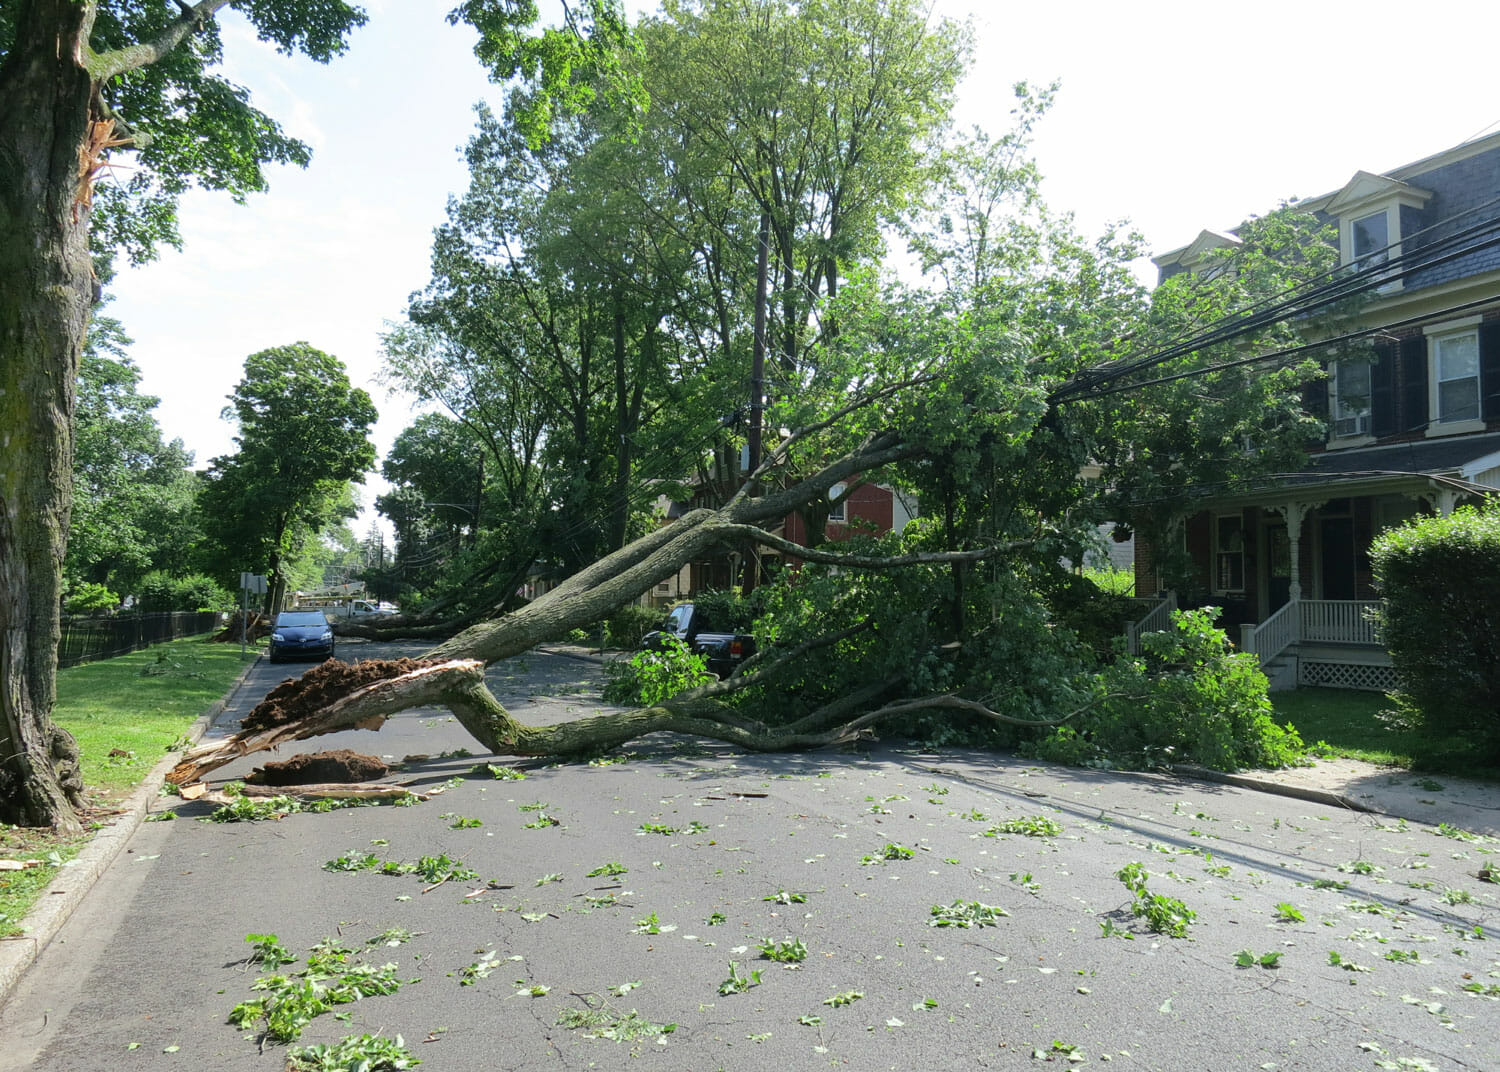 Storm Damaged Tree Falls on Road | Professional Tree Removal from our certified arborists